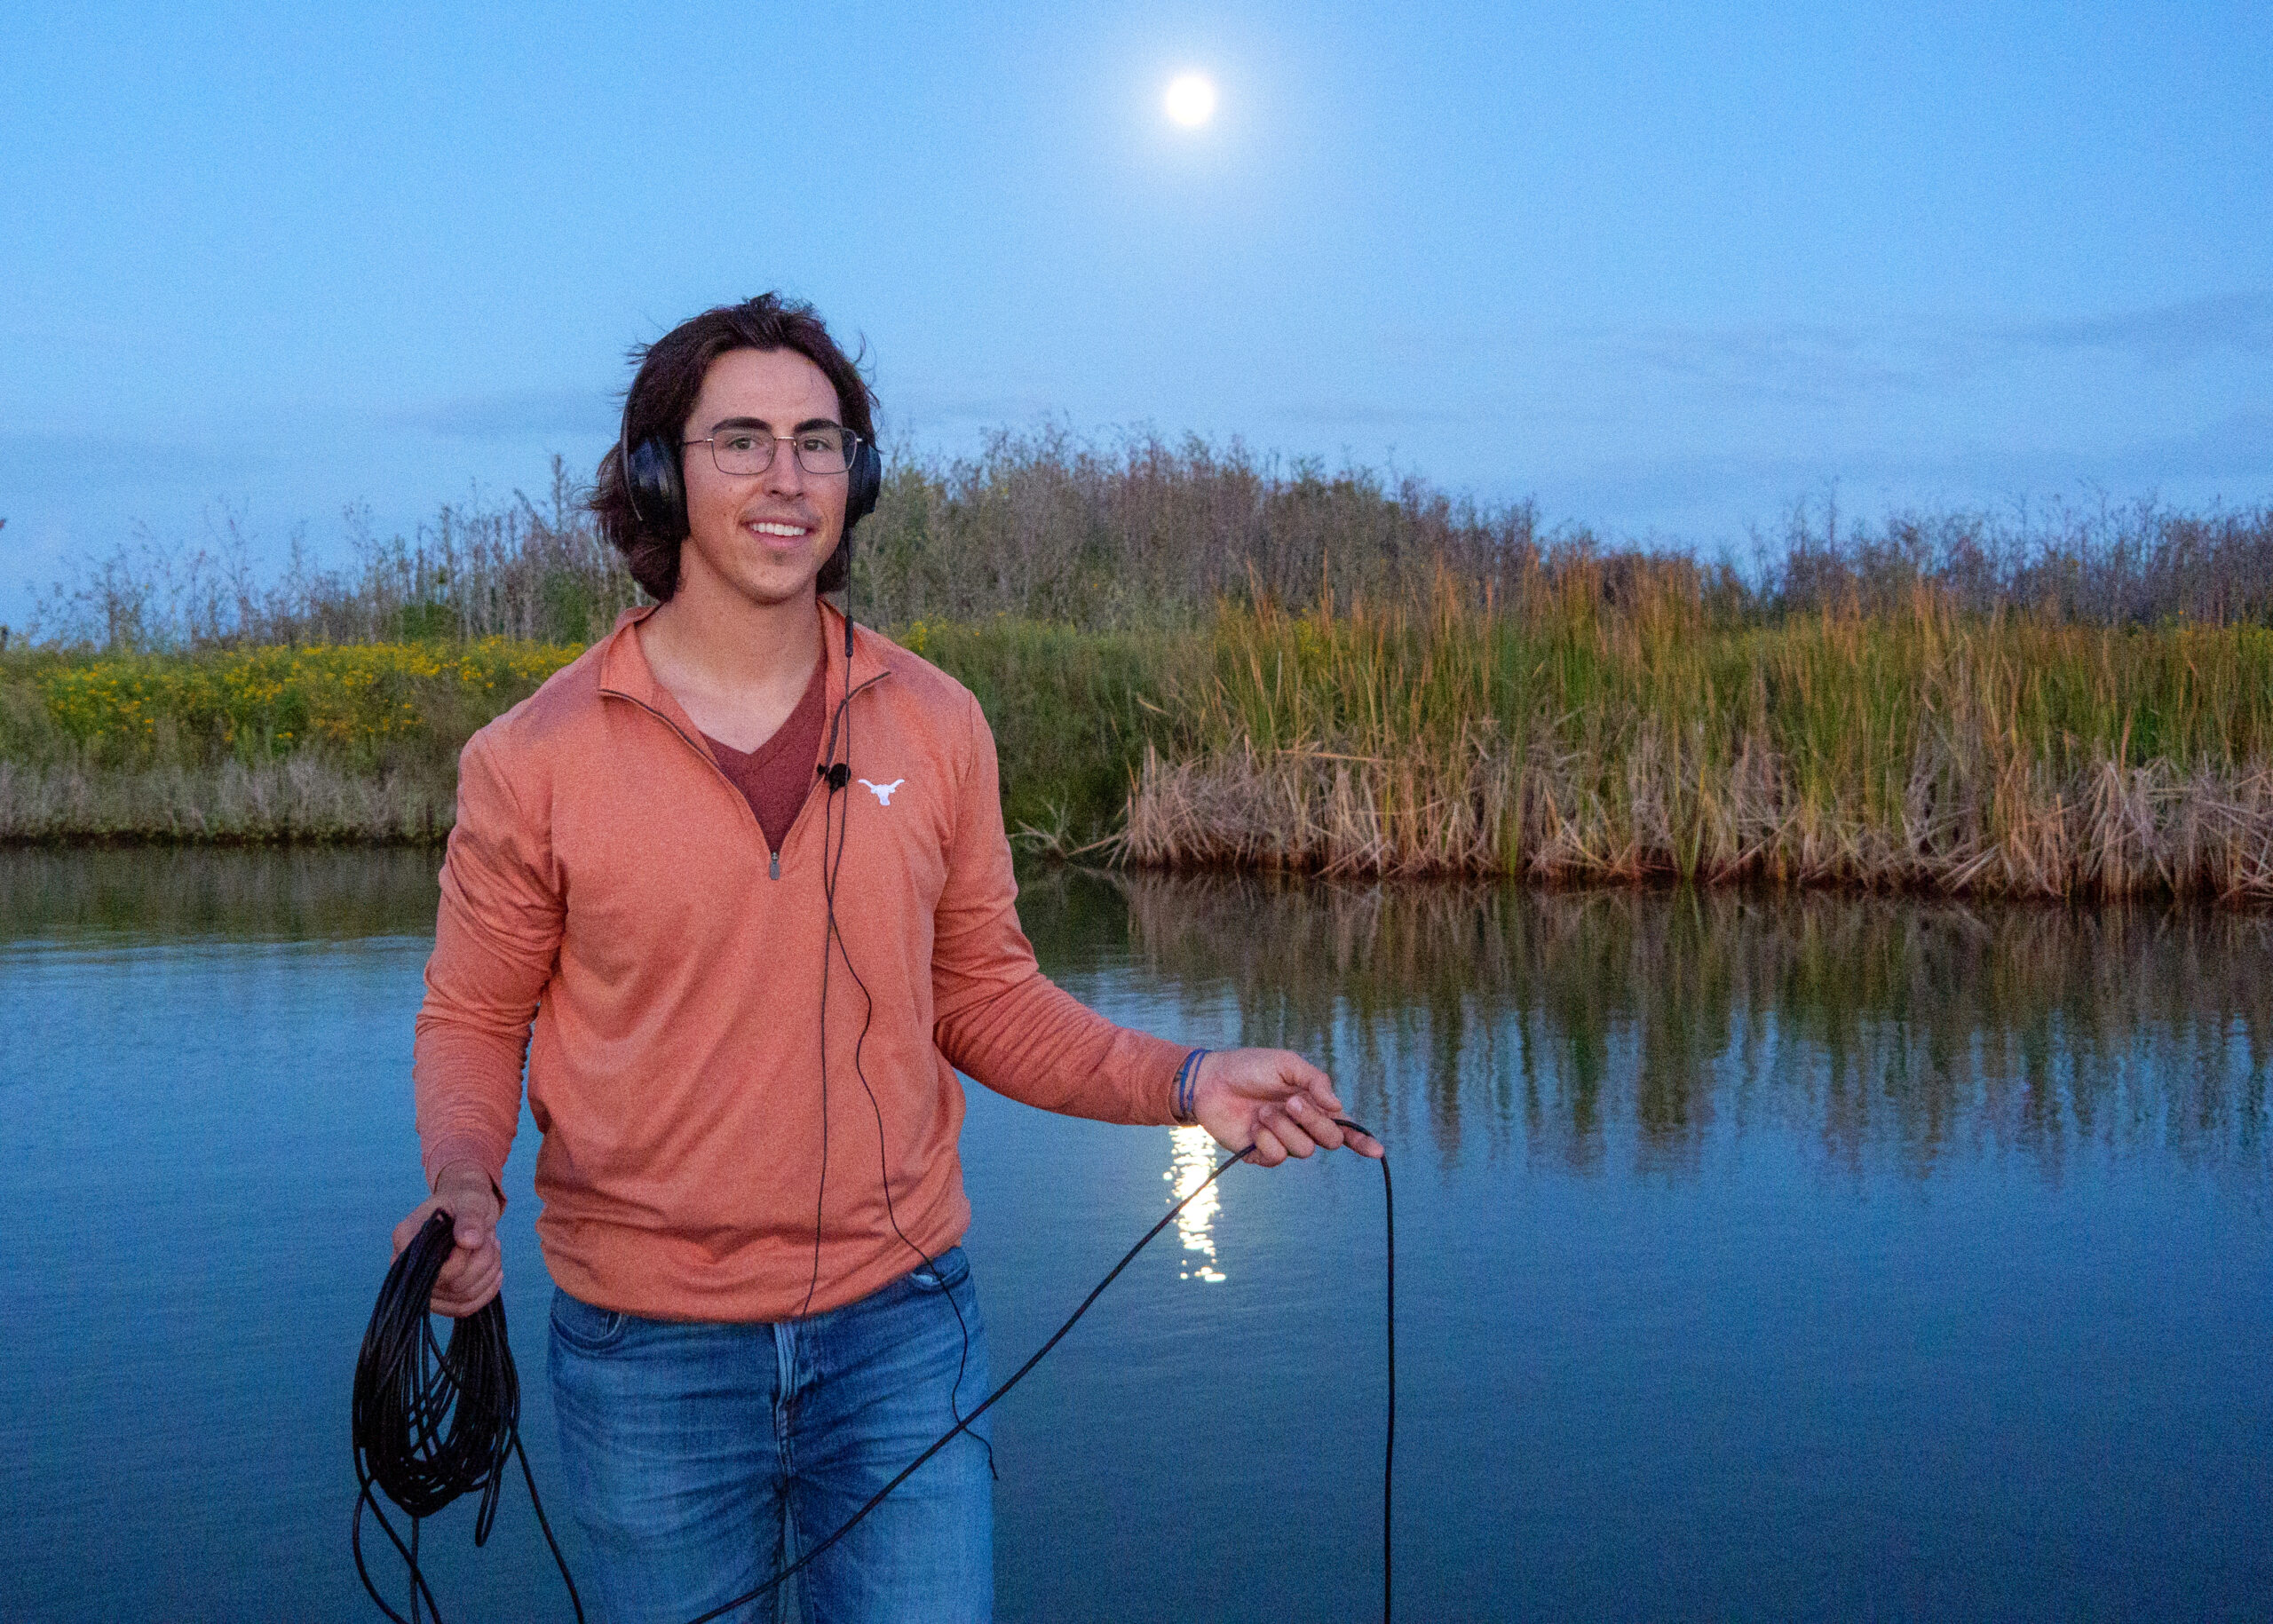 Philip Souza poses by the bay of Port Aransas with his fish sound recording gear. He's smiling, dressed in blue jeans and a burnt orange UT hoodie.